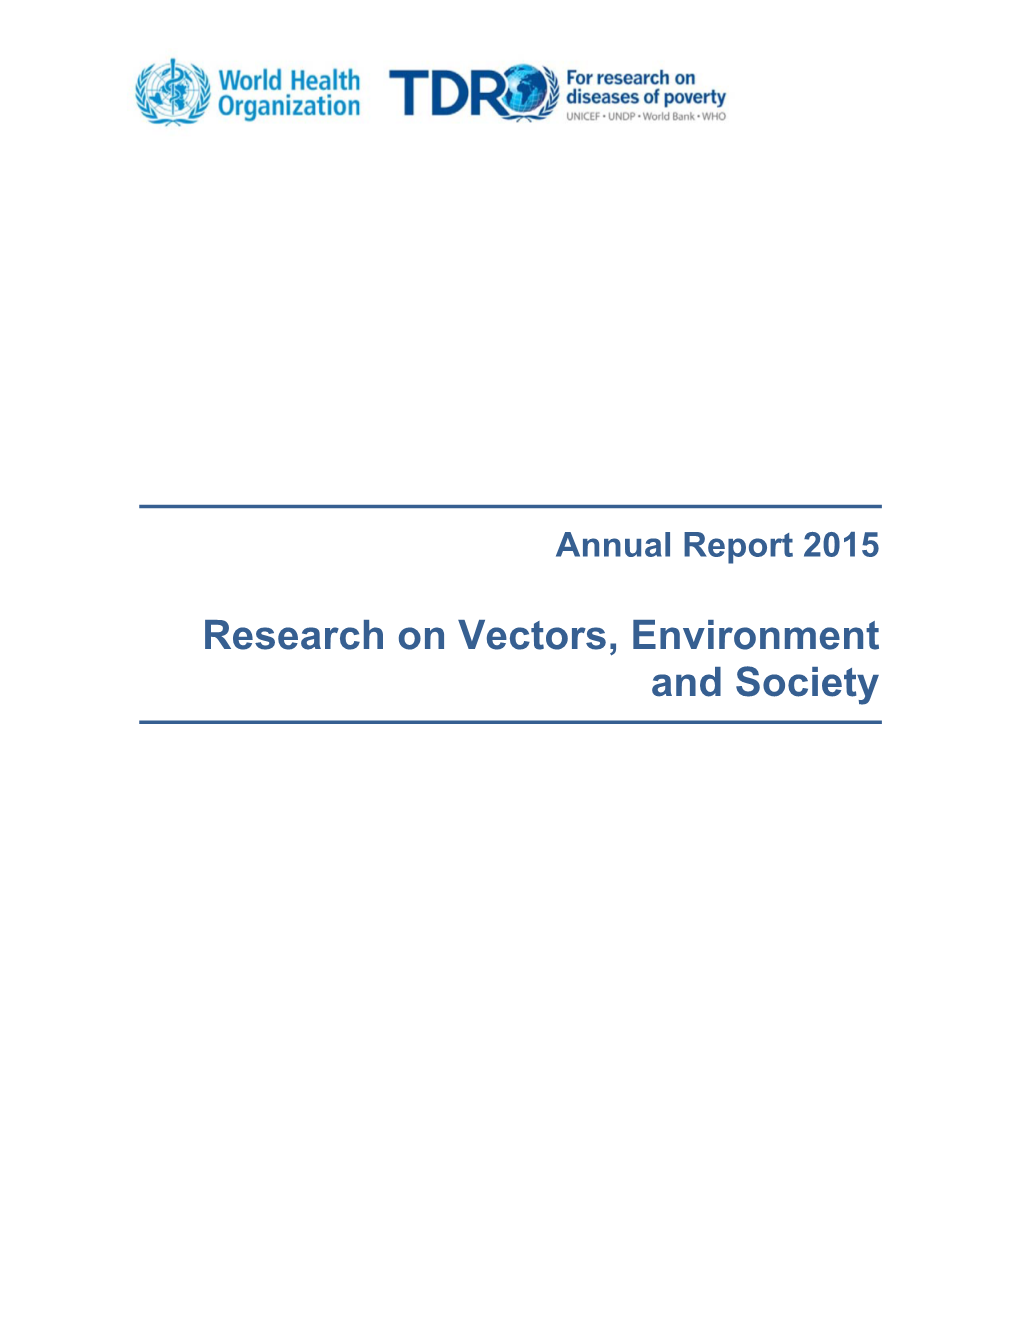 Research on Vectors, Environment and Society